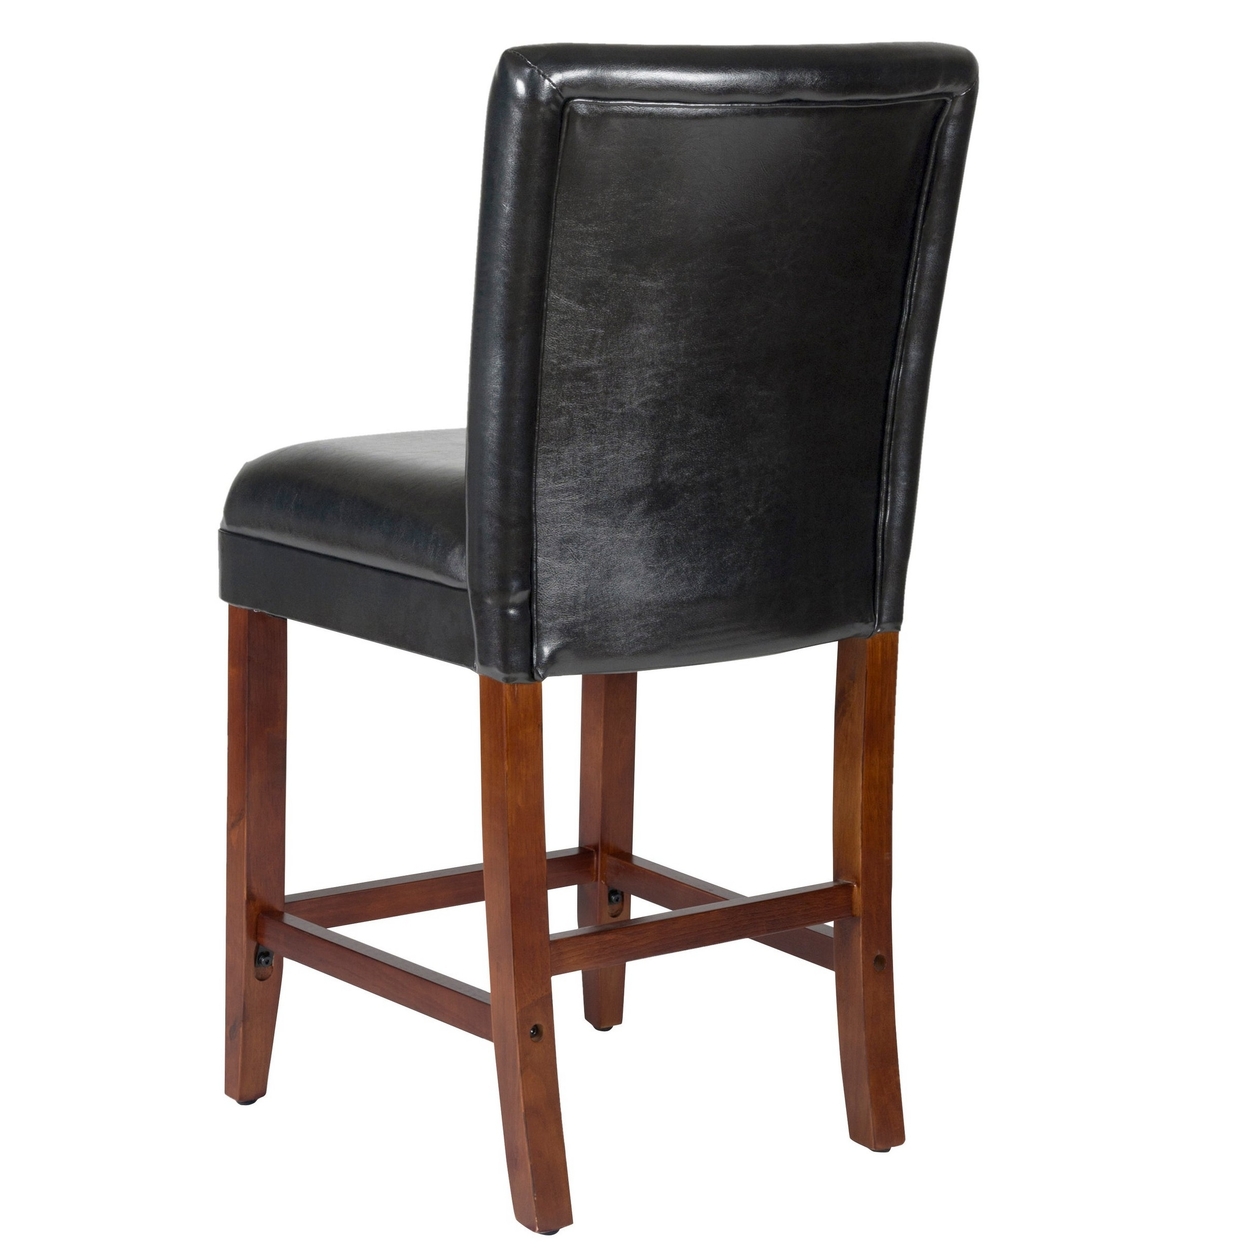 Wooden 24 Inch Bar Stool With Faux Leather Padded Seat And Tapered Feet, Black And Brown- Saltoro Sherpi